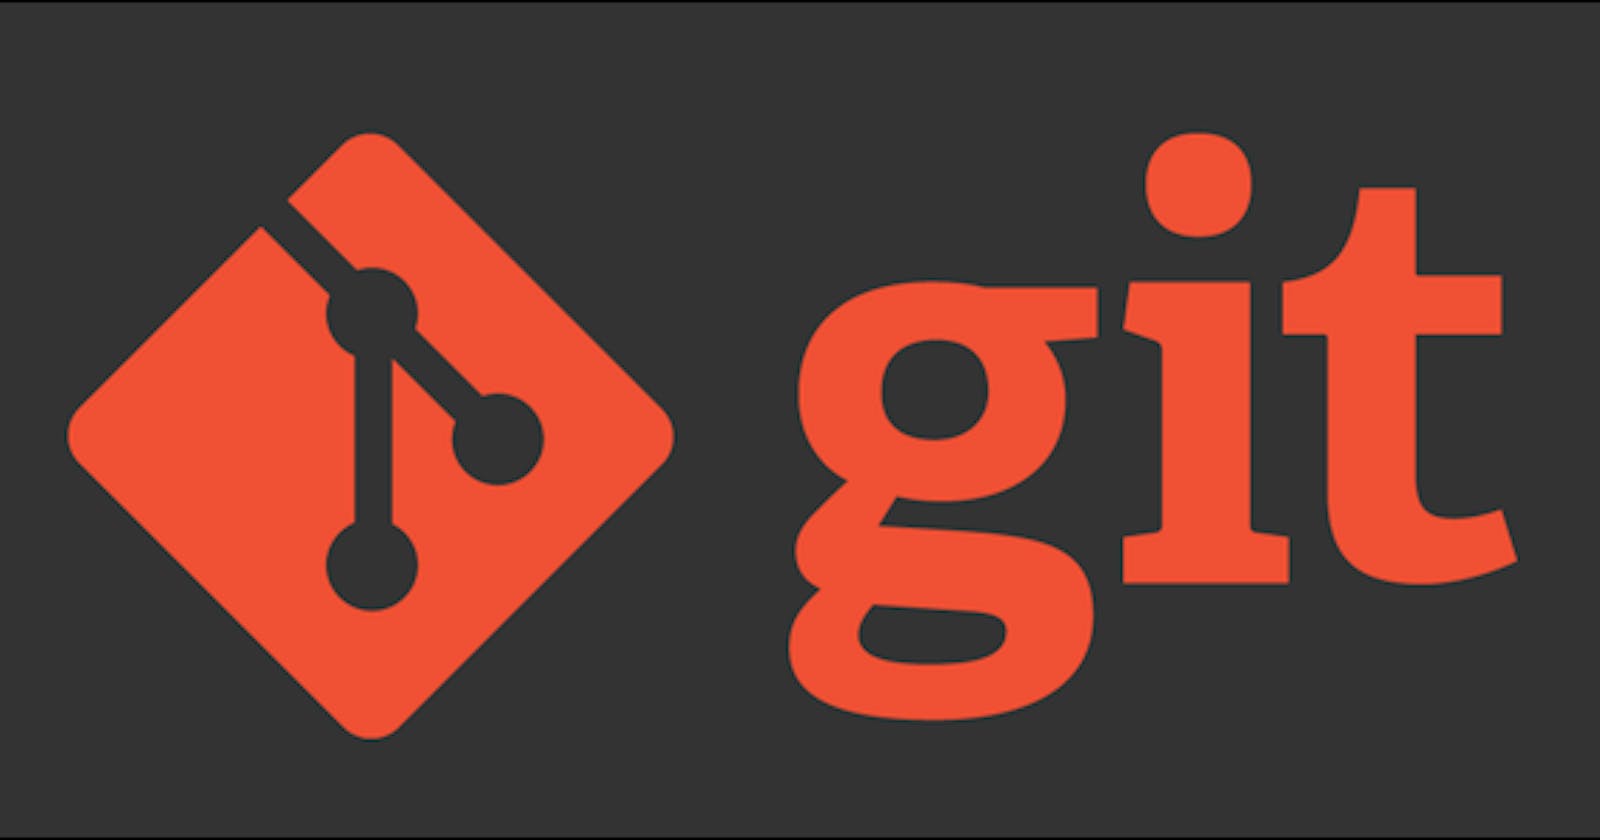 How to create and merge branches using Git and Github.